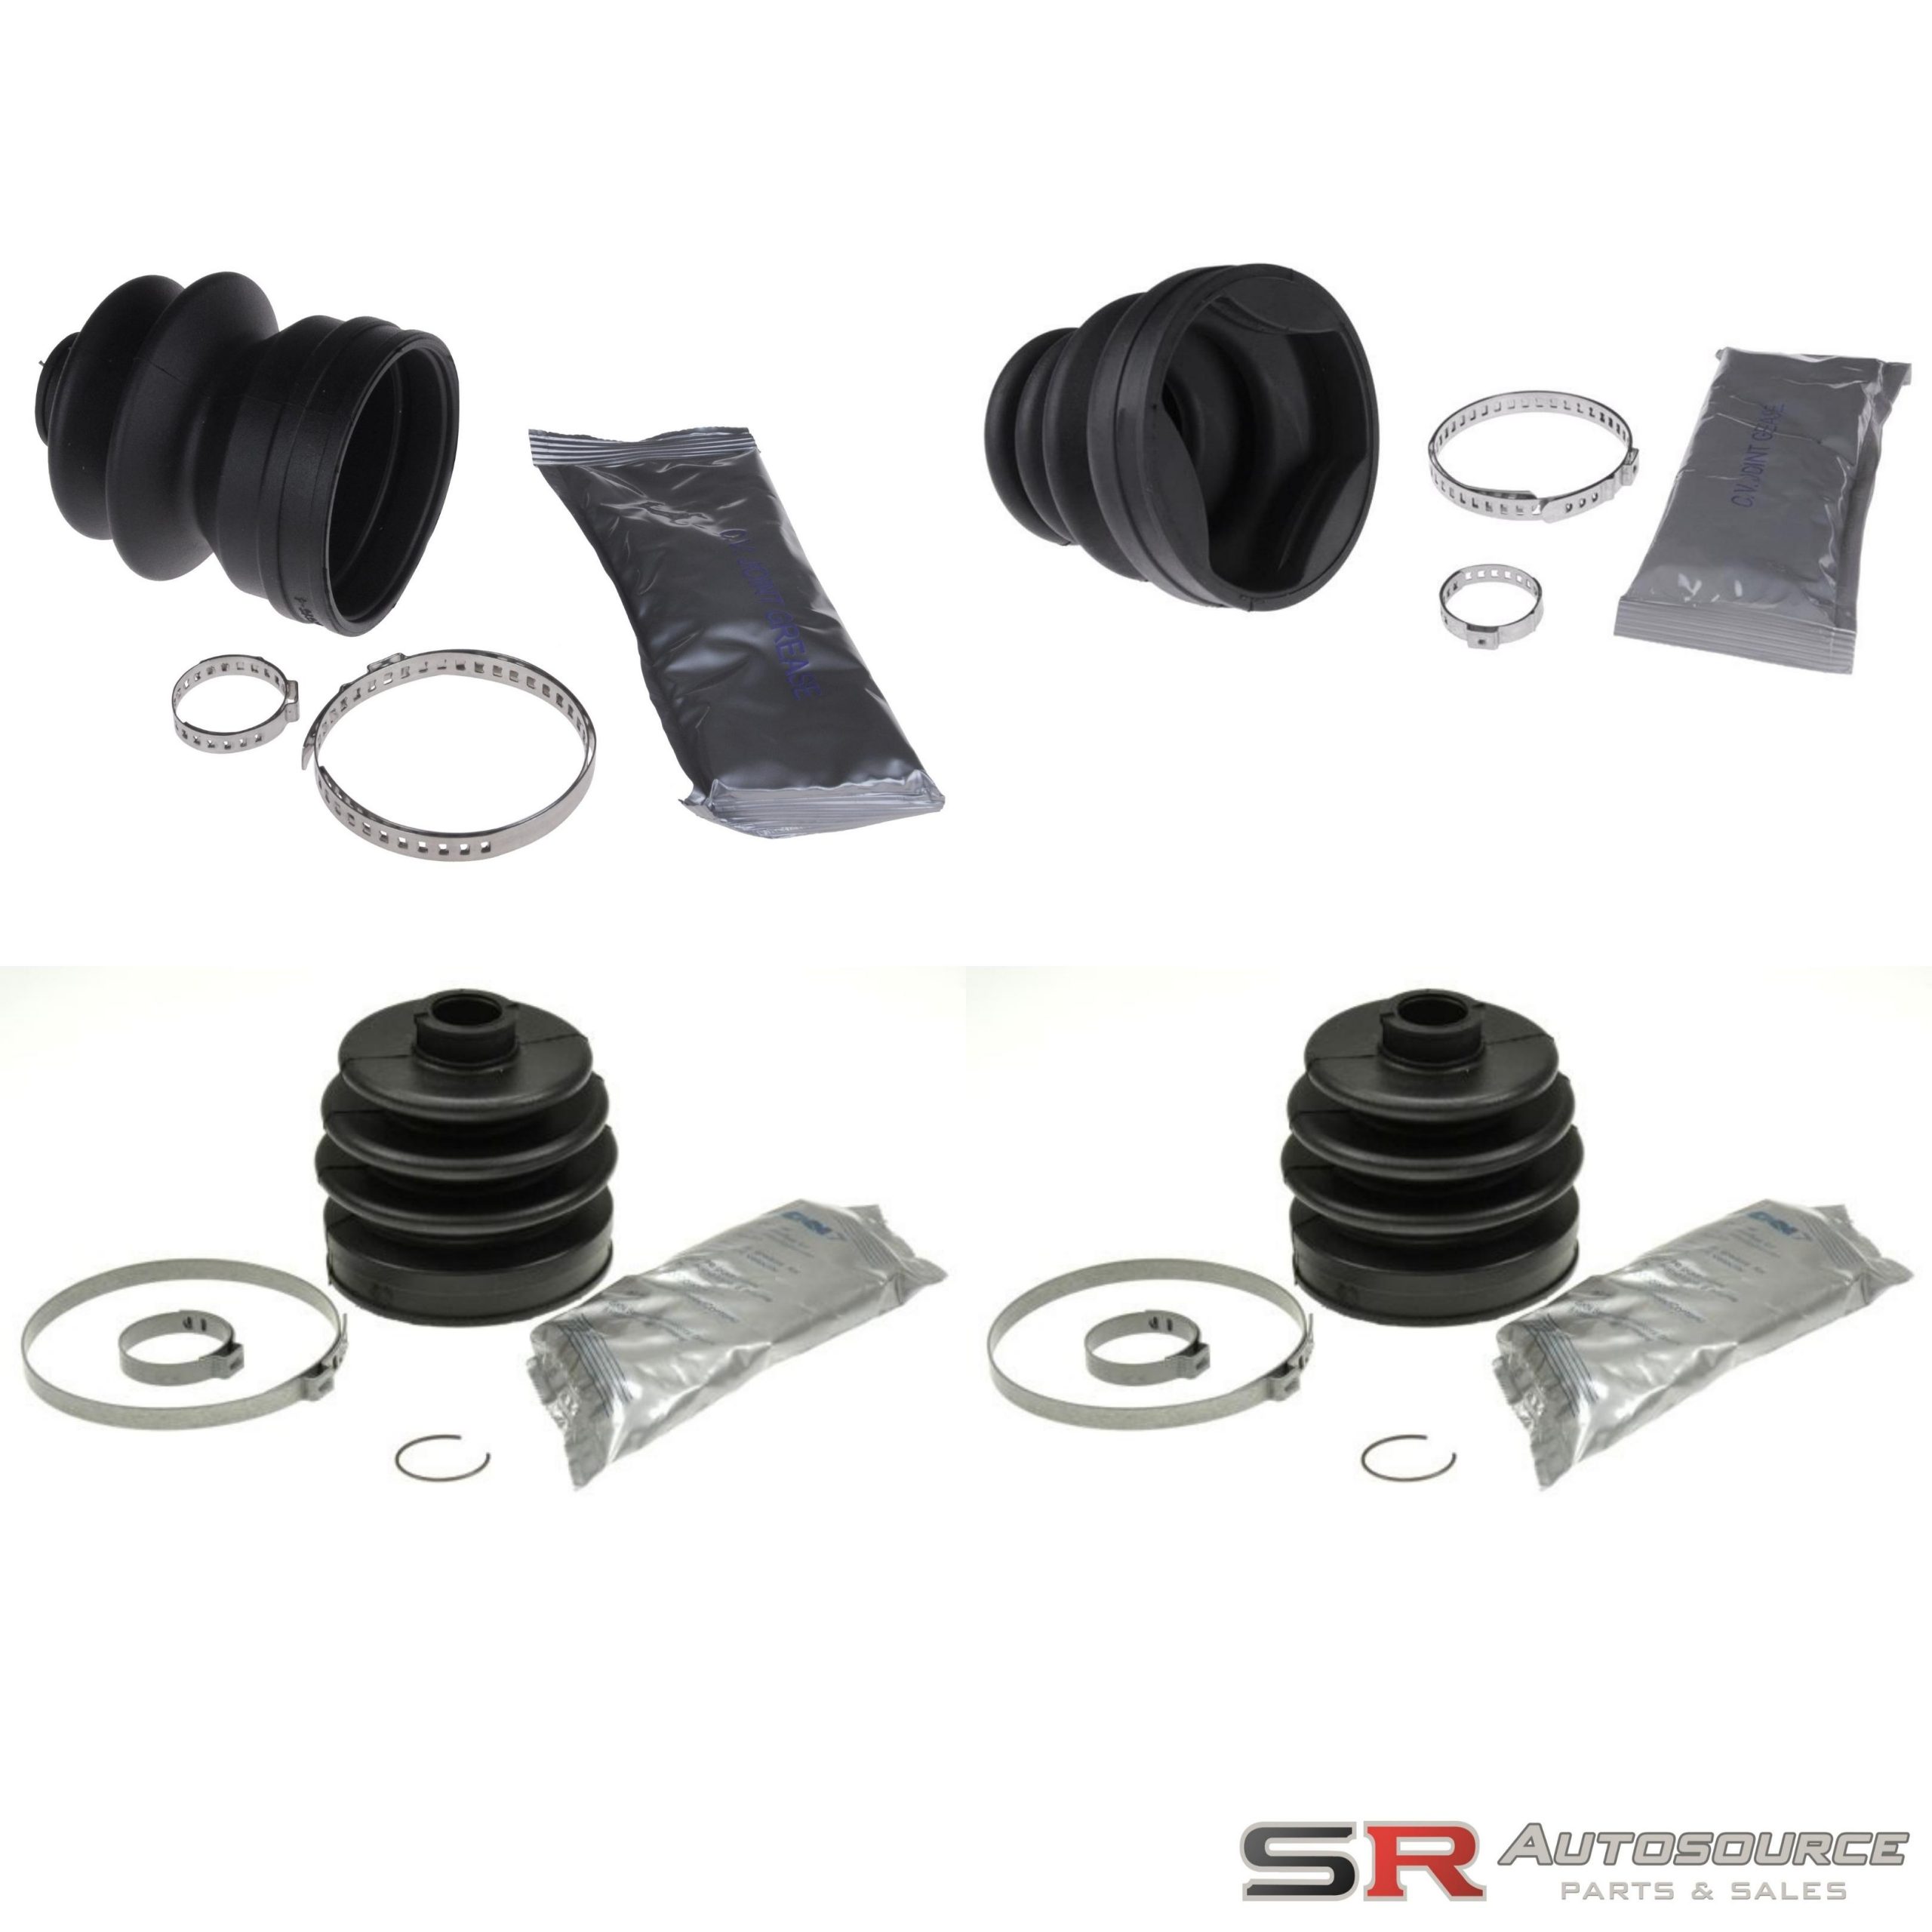 Complete Set of High Quality OE Replacement Front Inner and Outer CV Driveshaft Boots Skyline GTR